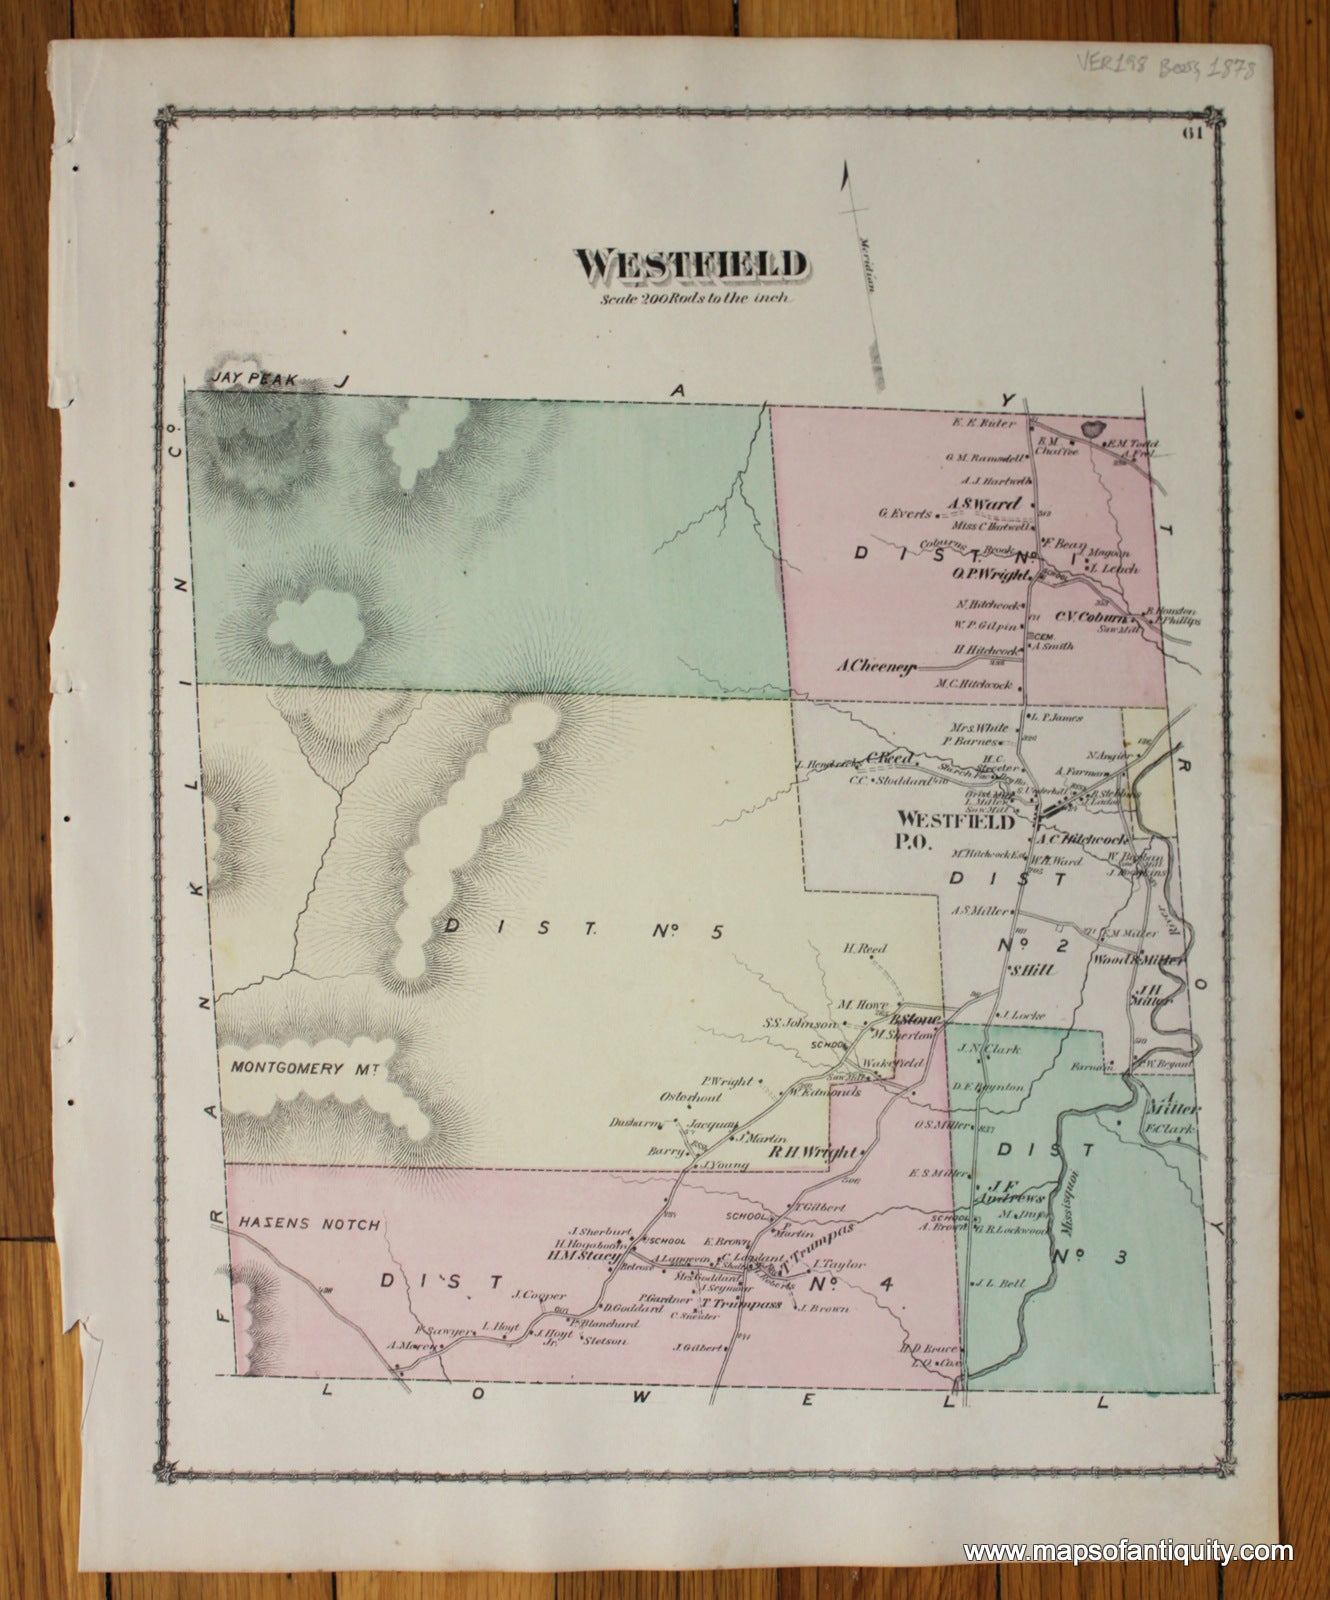 Antique-Hand-Colored-Map-Westfield-Verso:-Coventry-and-Coventry-Falls-(VT)-*****UNAVAILABLE*****-United-States-Northeast-1878-Beers-Maps-Of-Antiquity